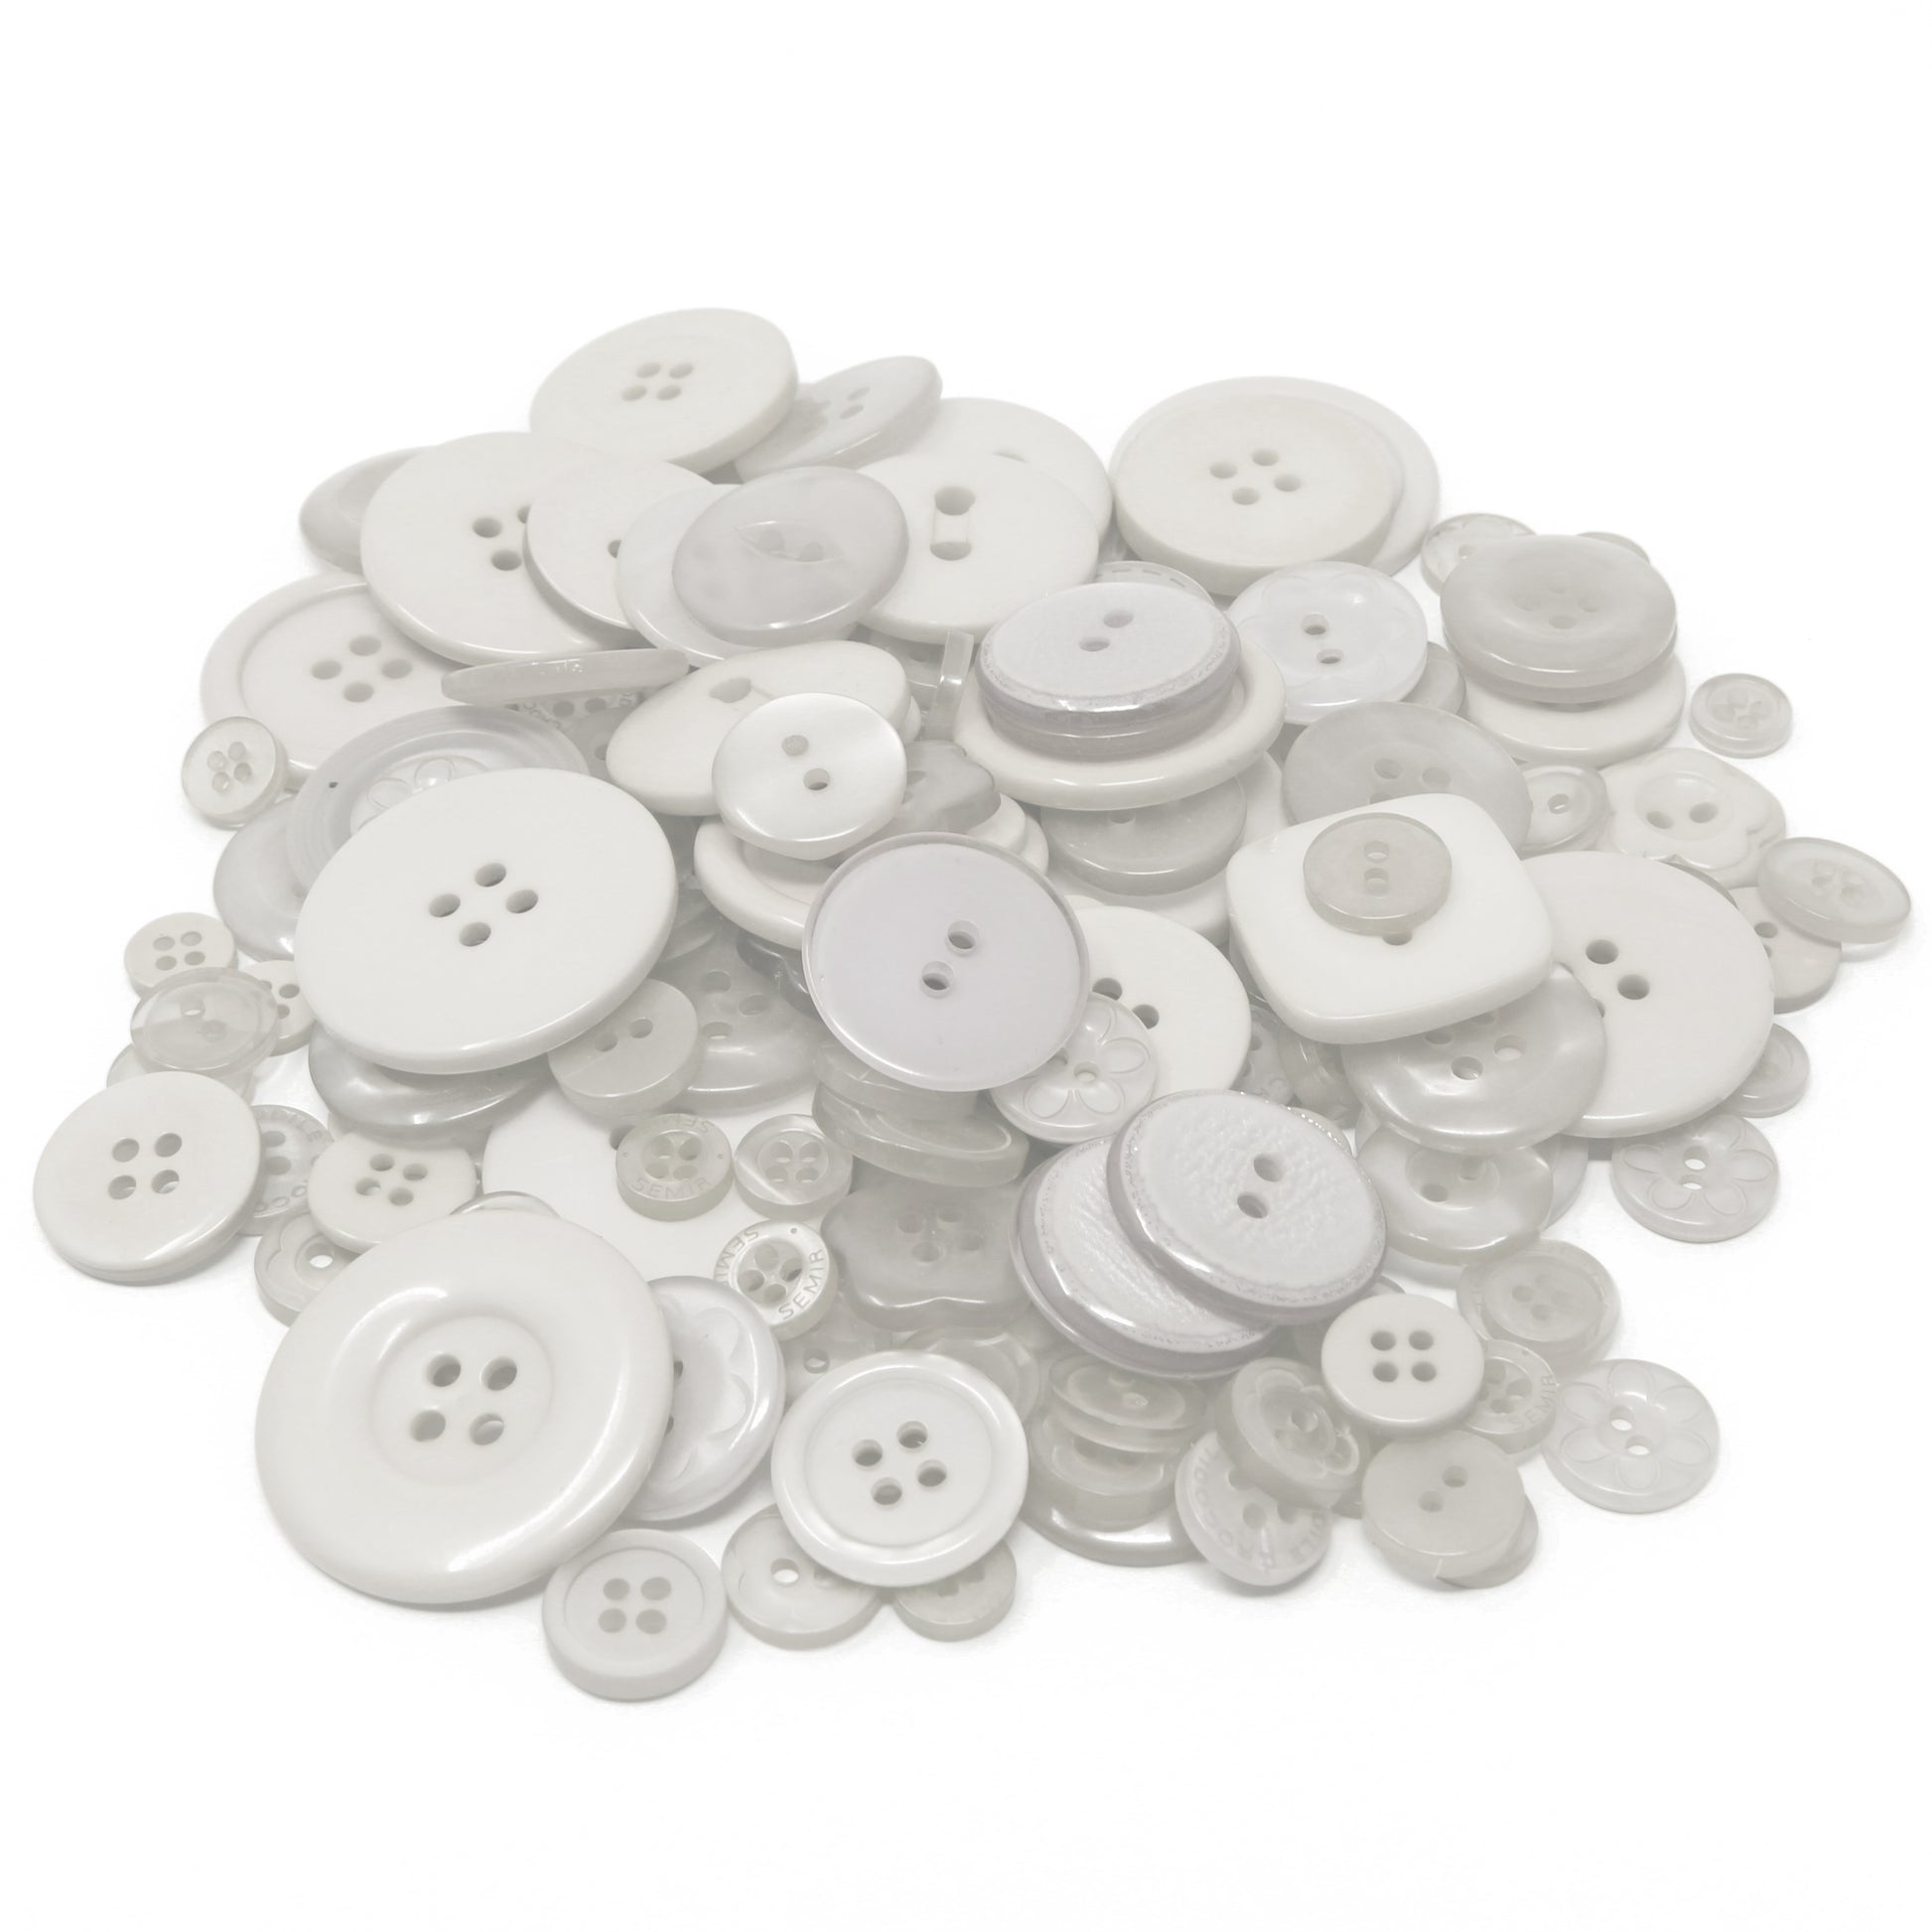 White 100g Bags Of Mix Acrylic & Resin Buttons